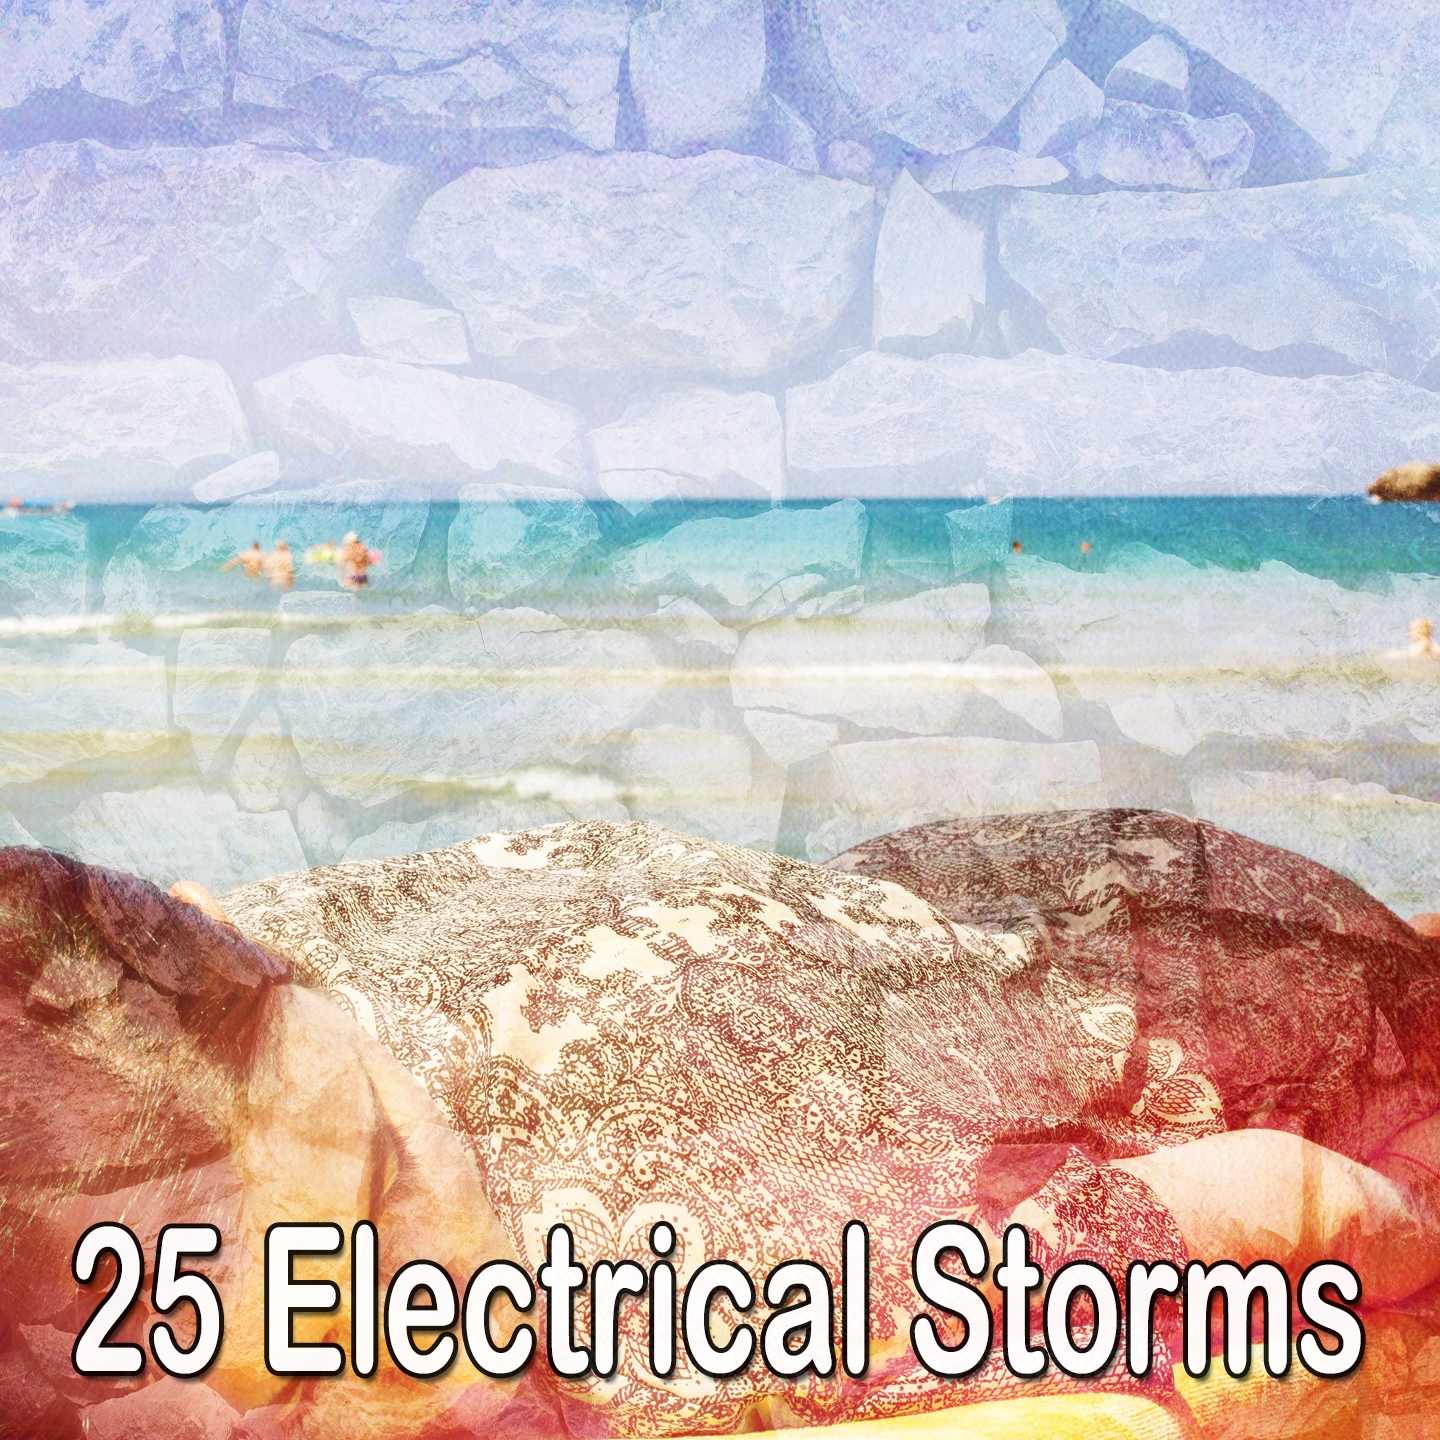 25 Electrical Storms